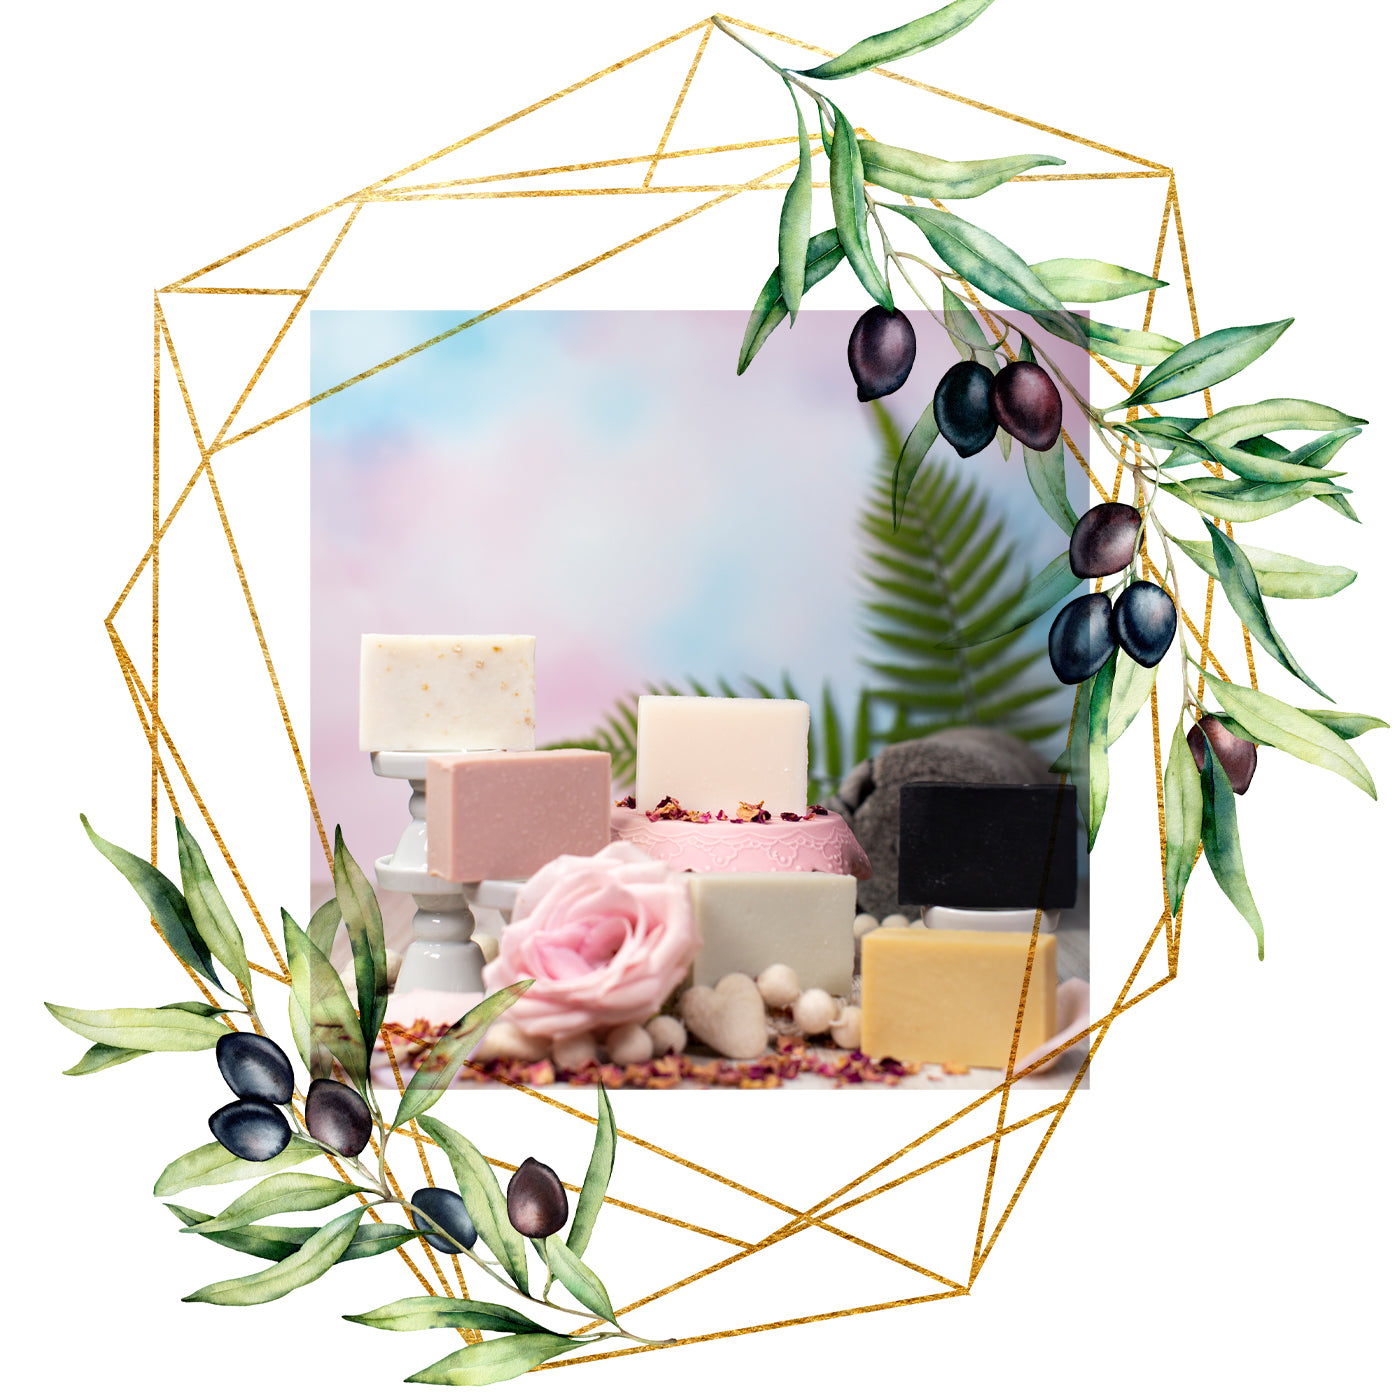 Reasons to Consider Our Pure Olive Oil Castile Soap Bars